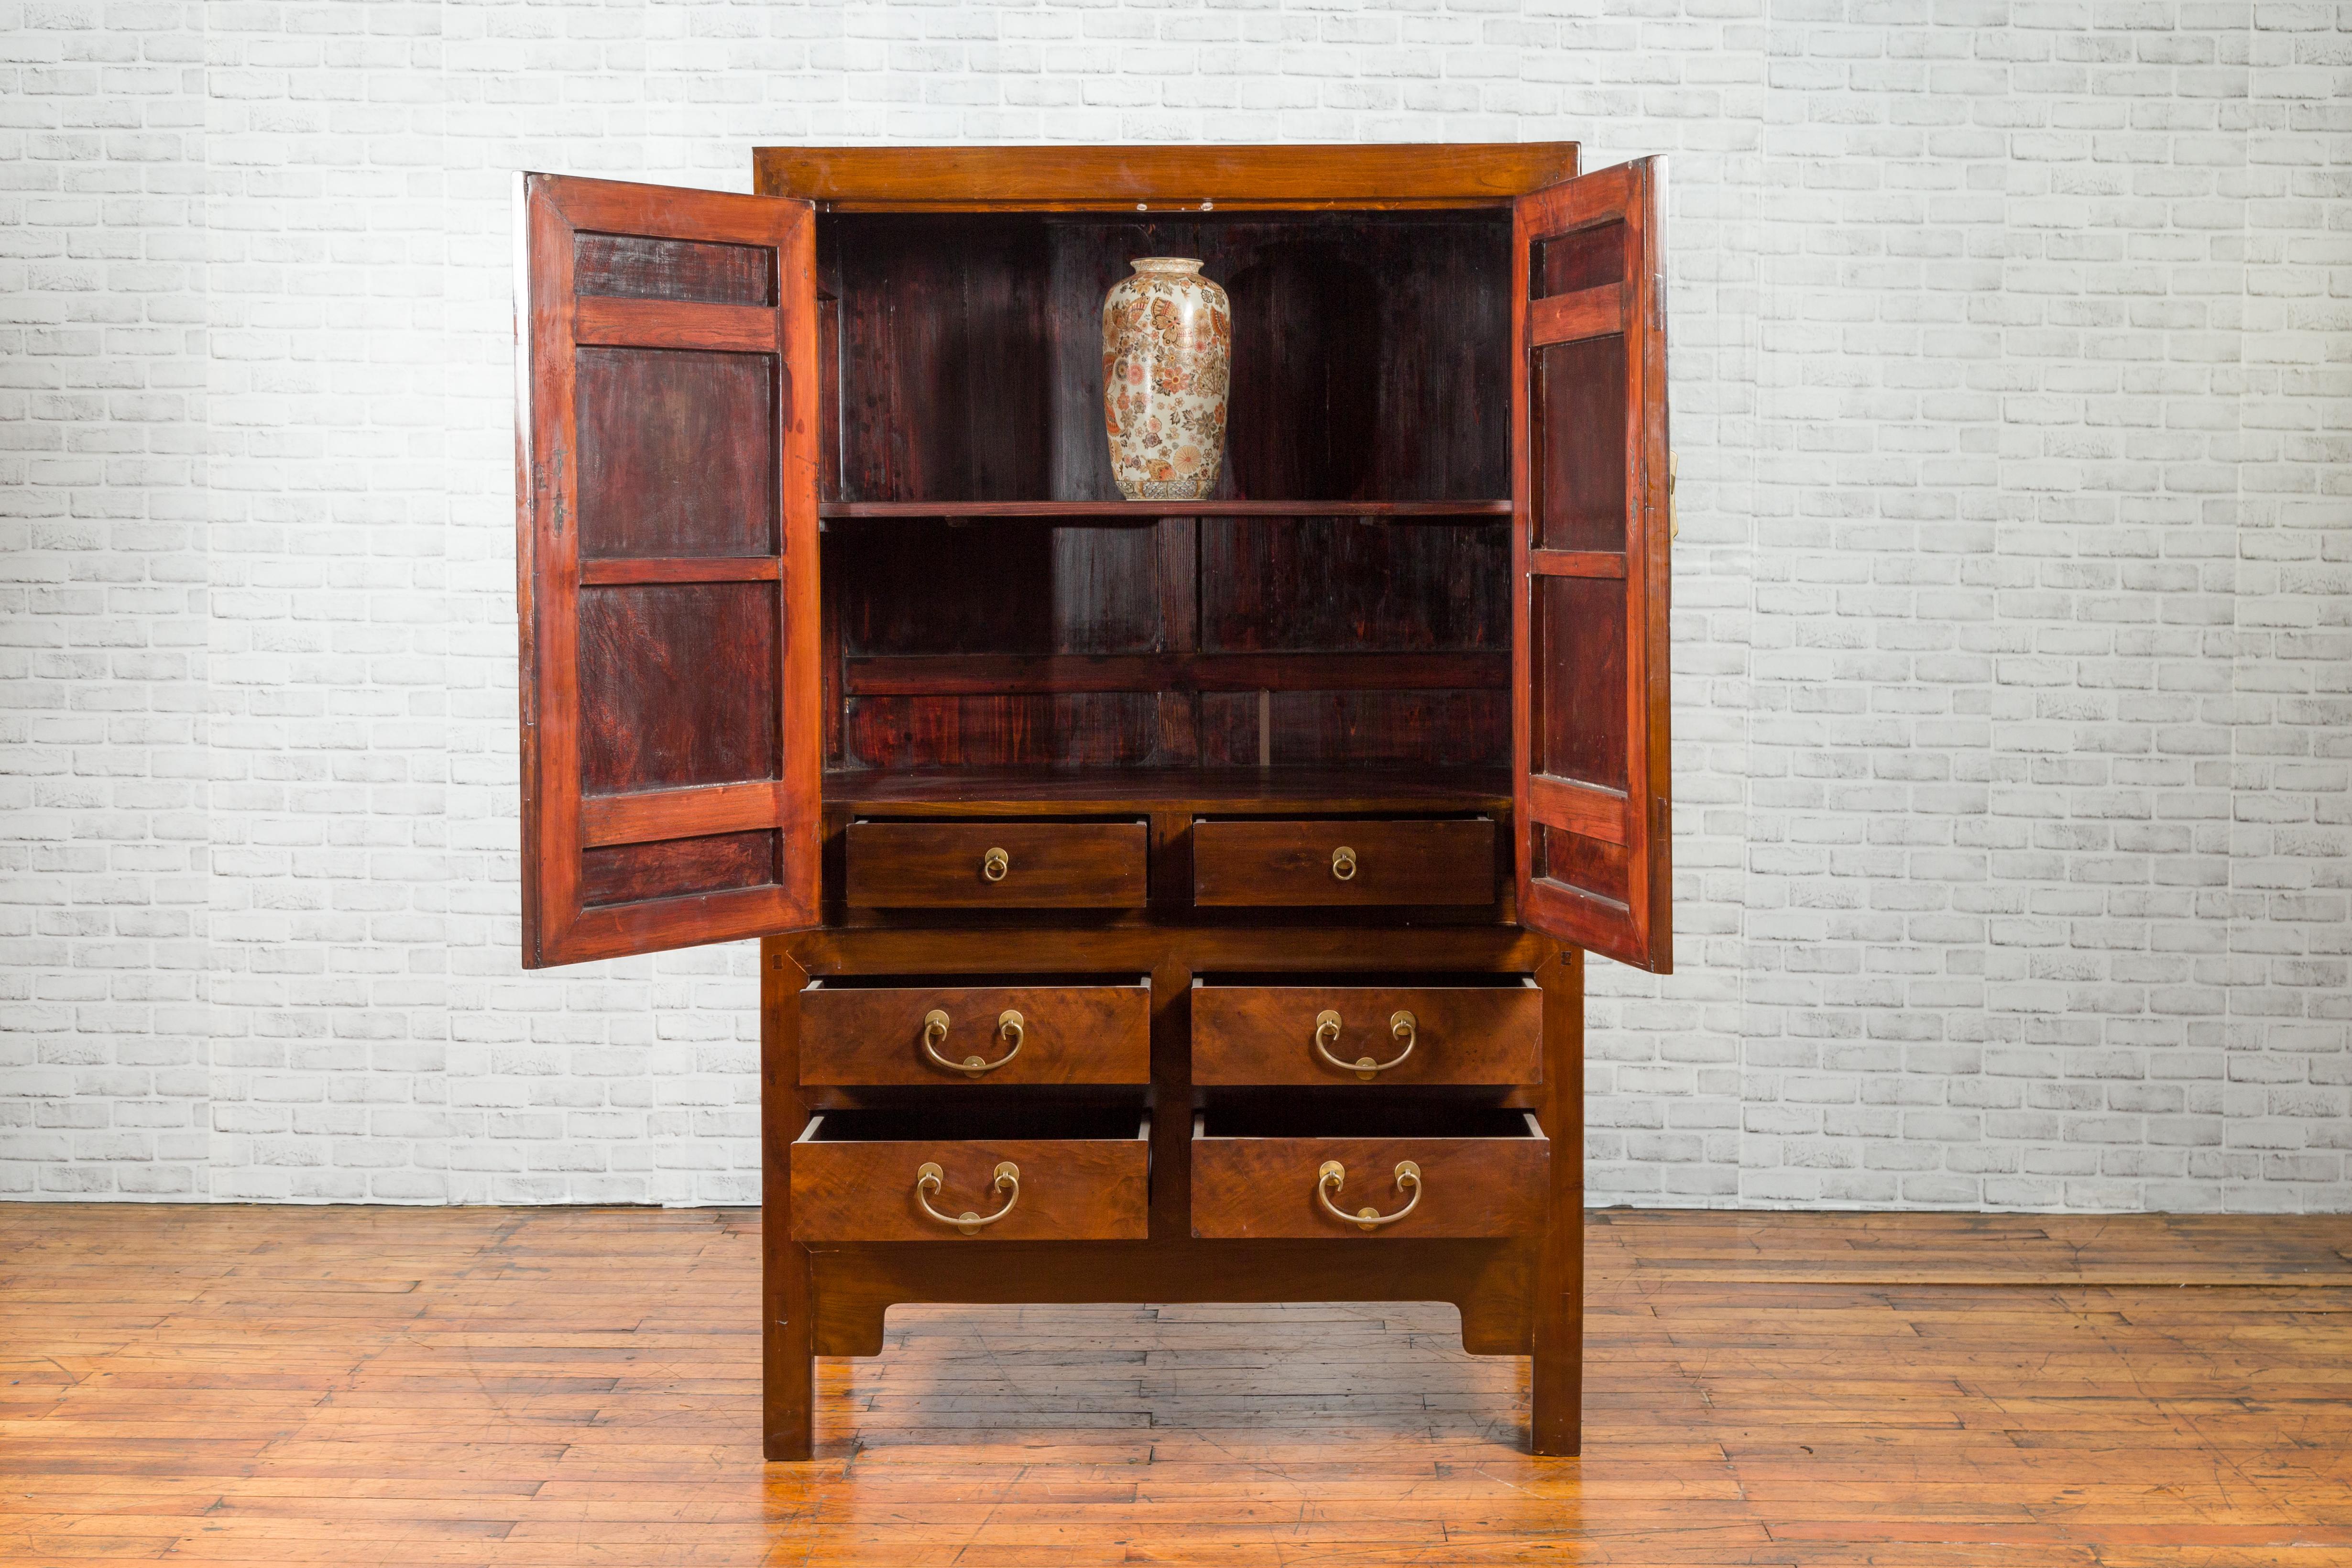 Chinese 1920s-1930s Elm and Burl Cabinet with Doors, Drawers and Brass Hardware For Sale 6